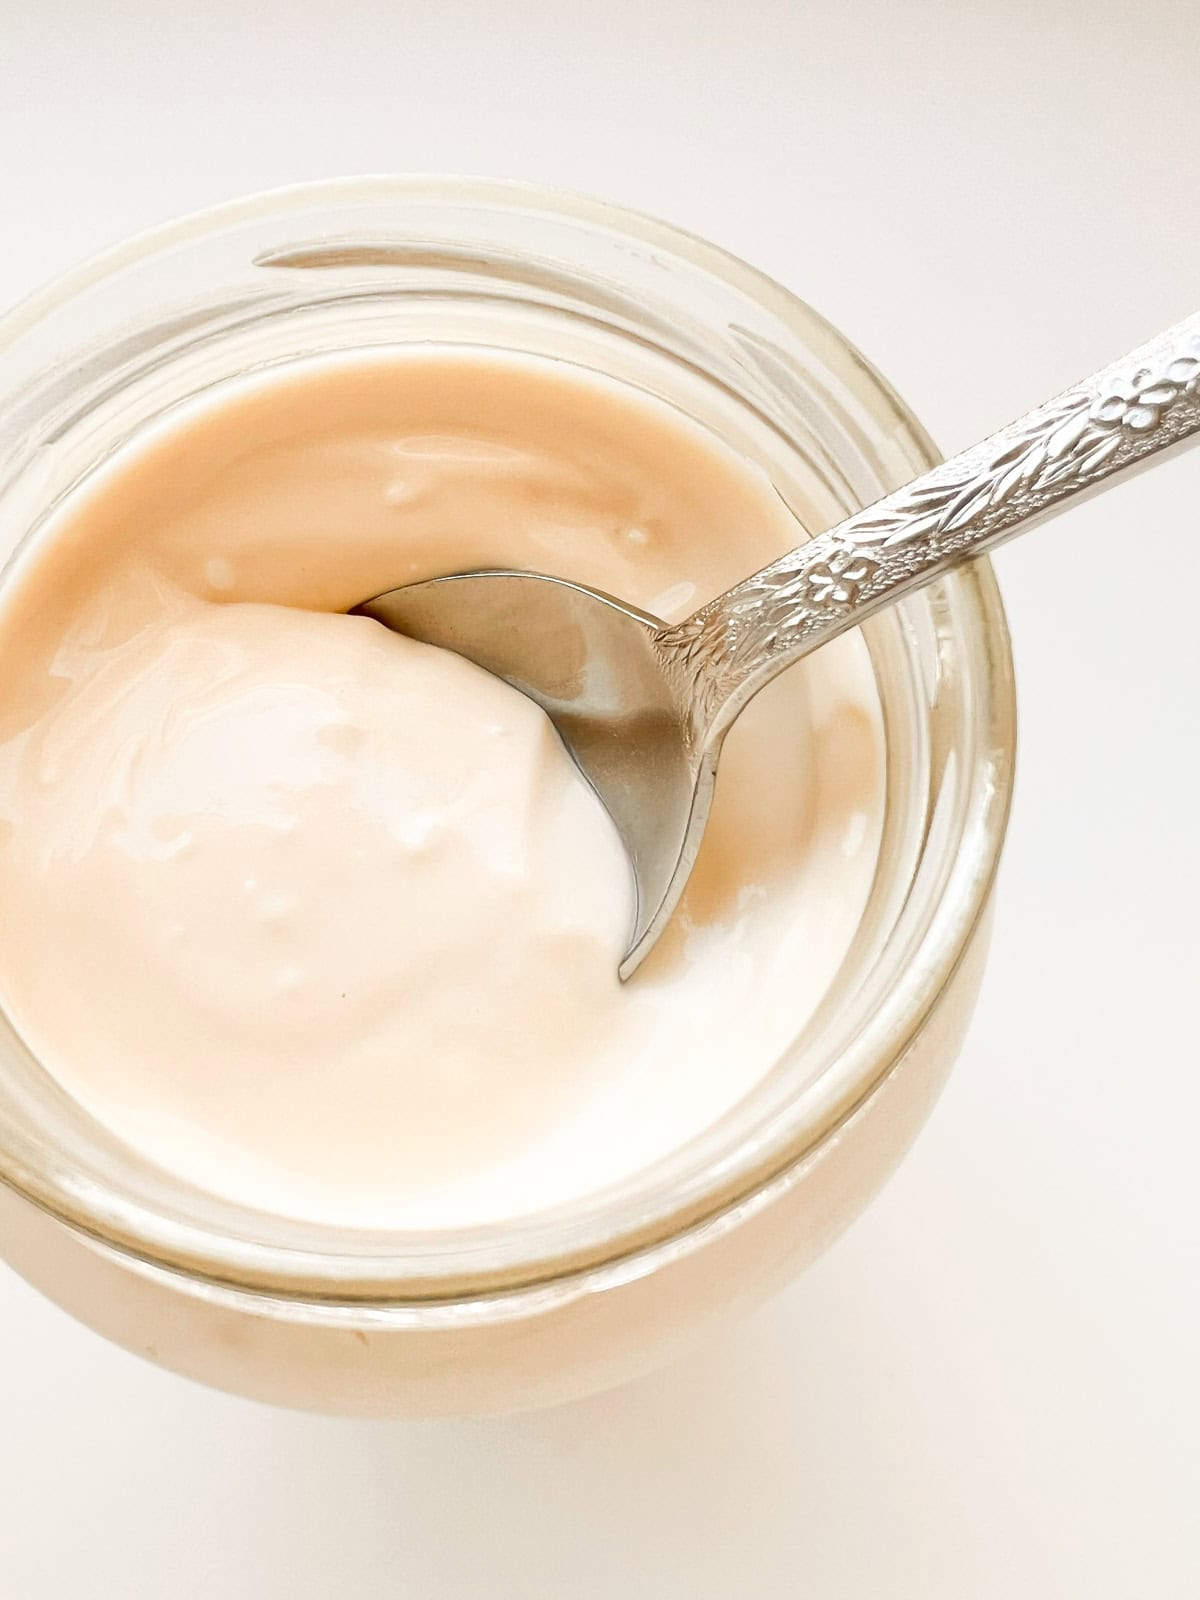 A close up image of a jar of baked milk yogurt with a floral patterned silver spoon scooping some of the yogurt.